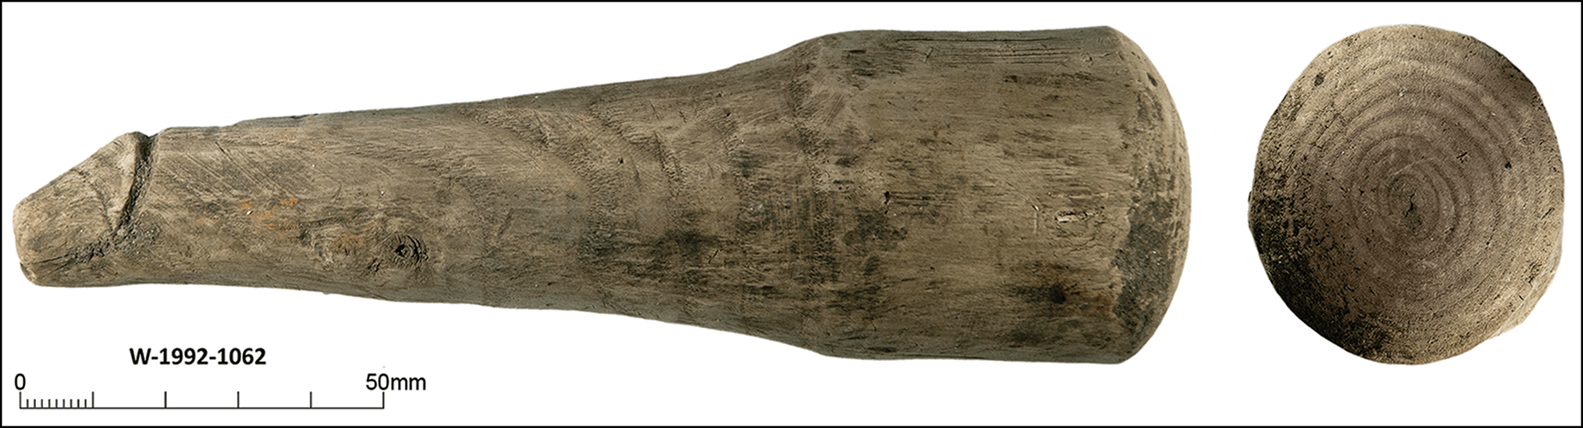 Wooden phallus from ancient Rome